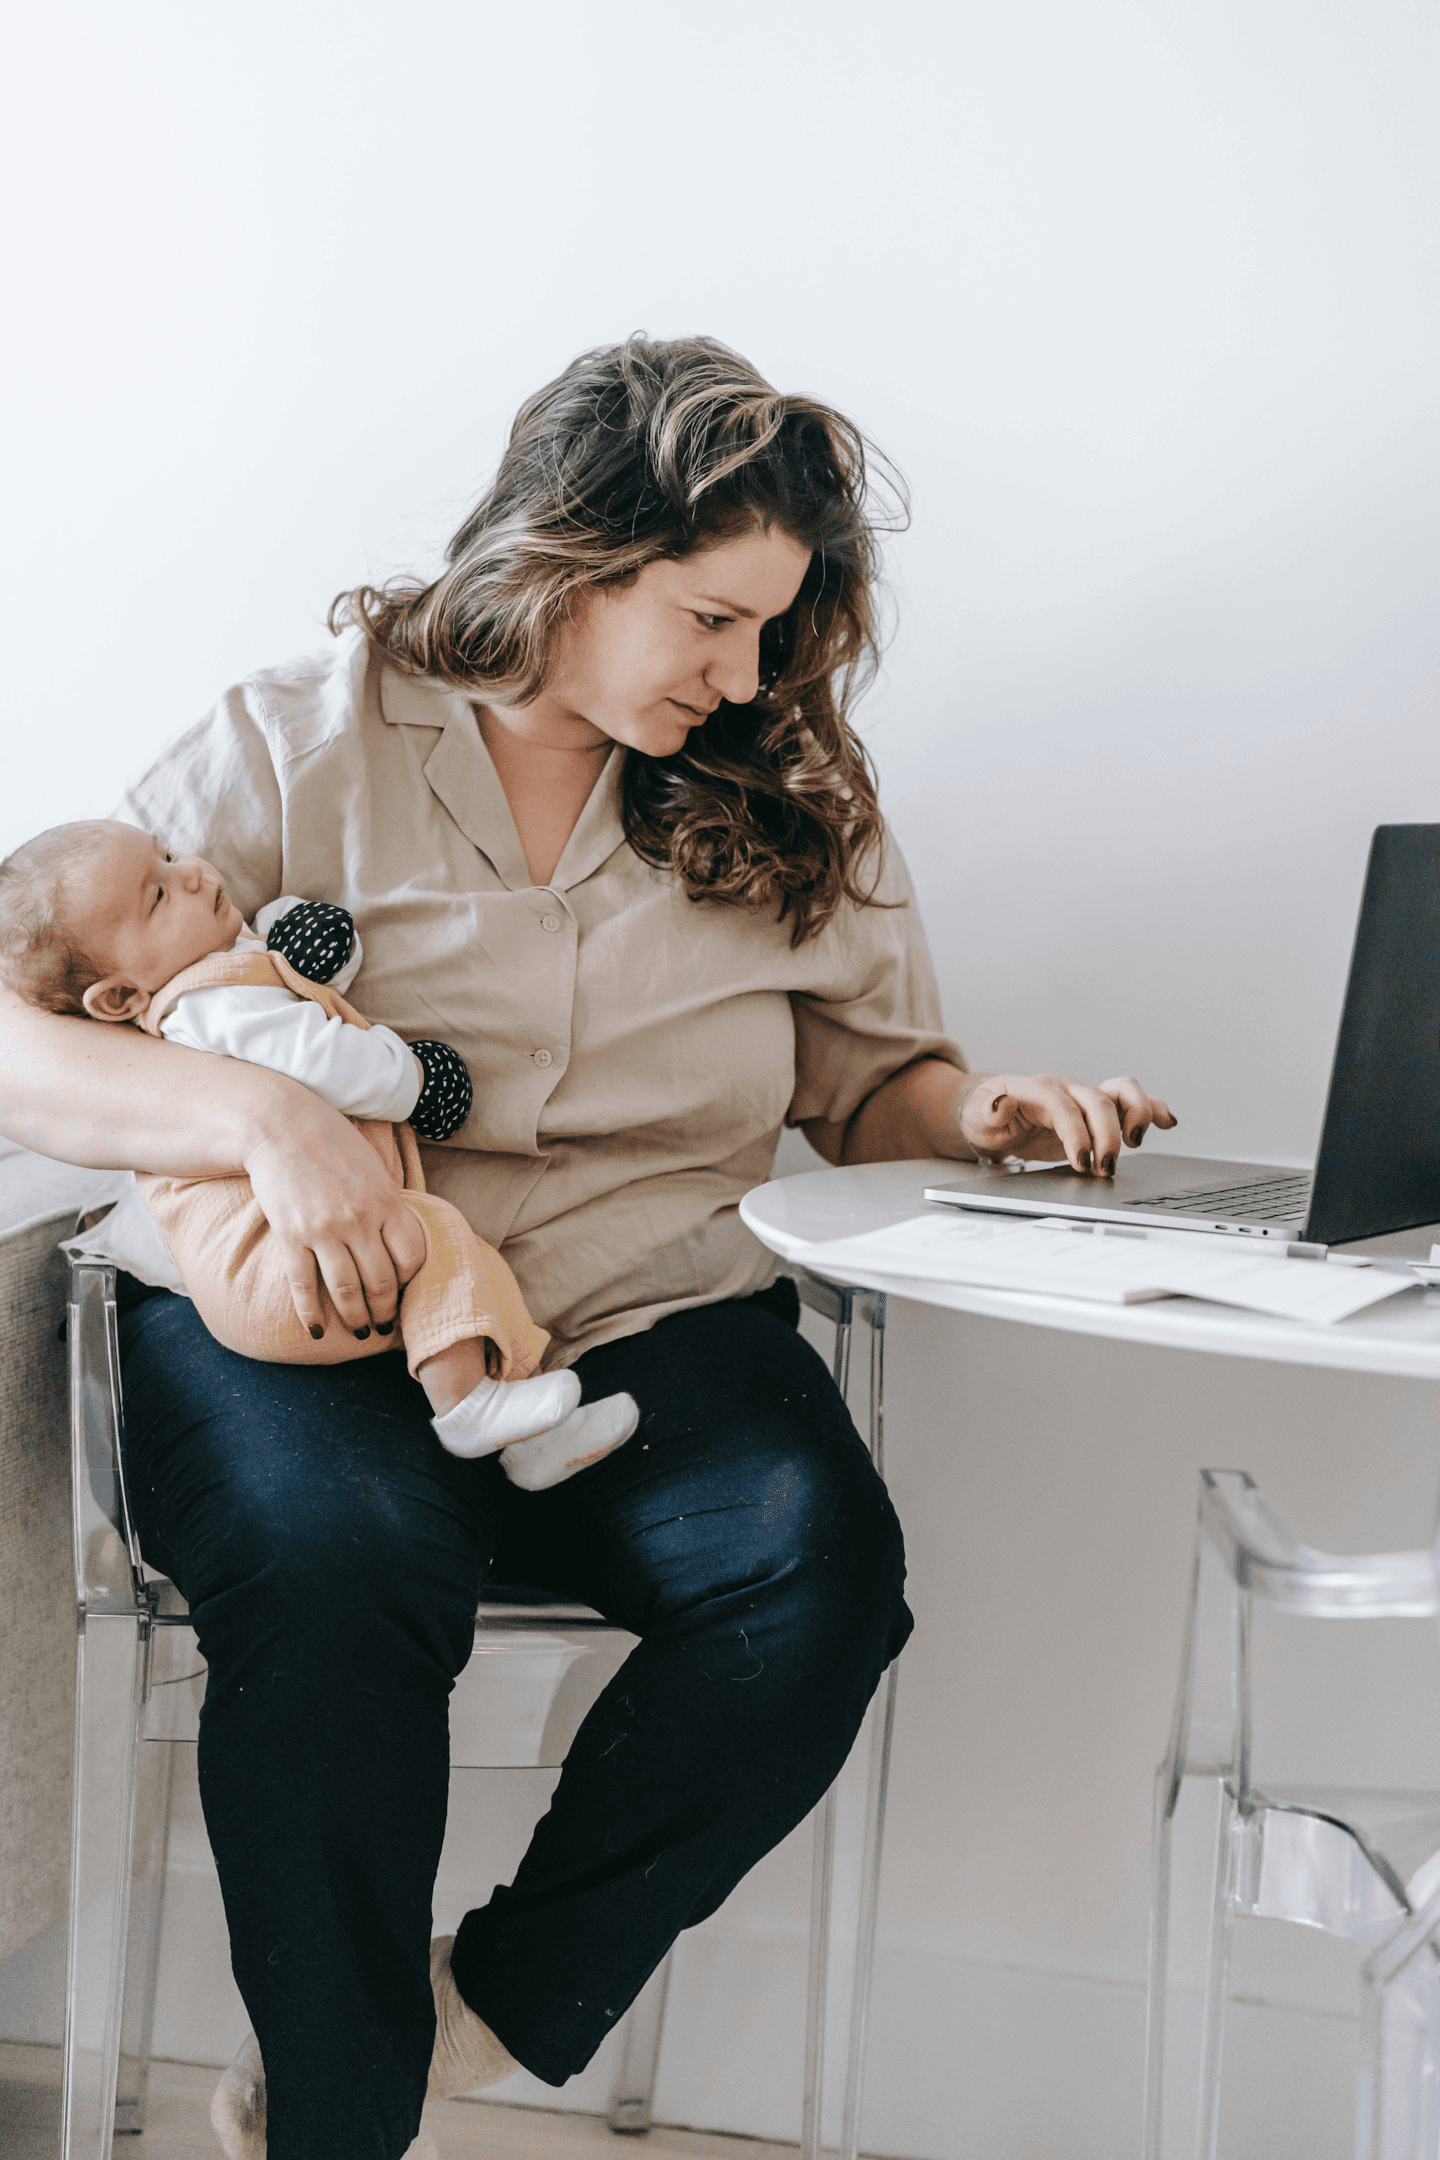 What happens if I get fired before maternity leave